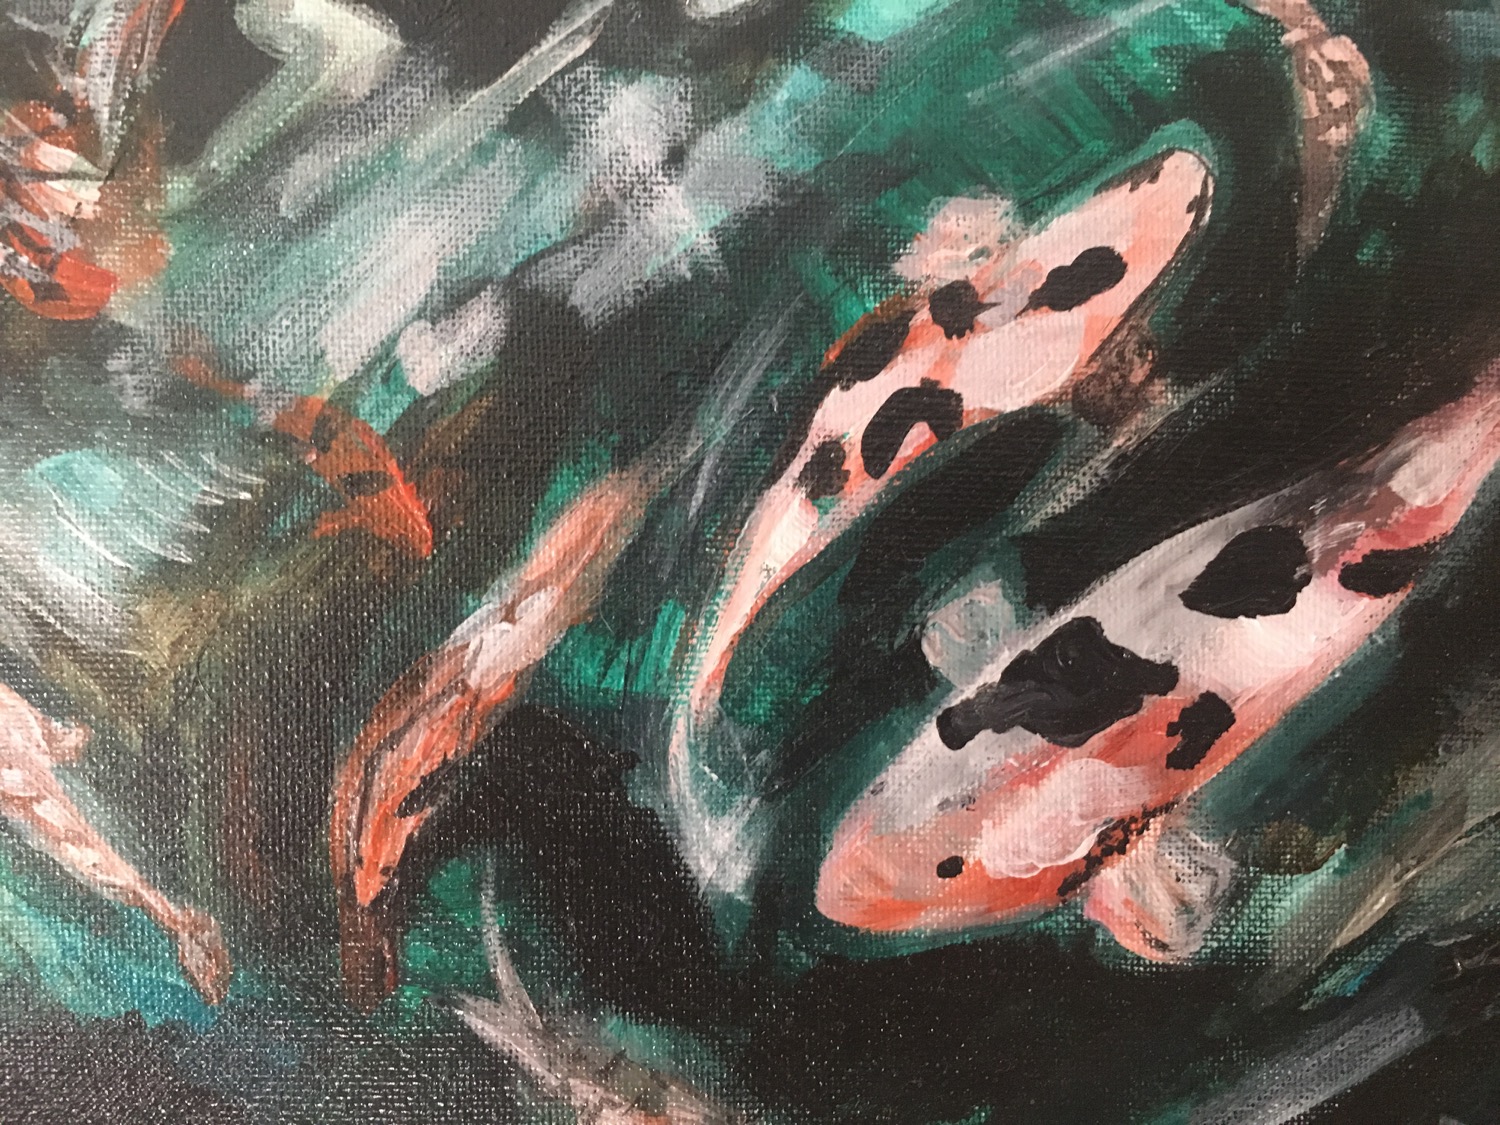 Koi Fish Swimming, Acrylic on Canvas, 11 x 14 inches, 2014